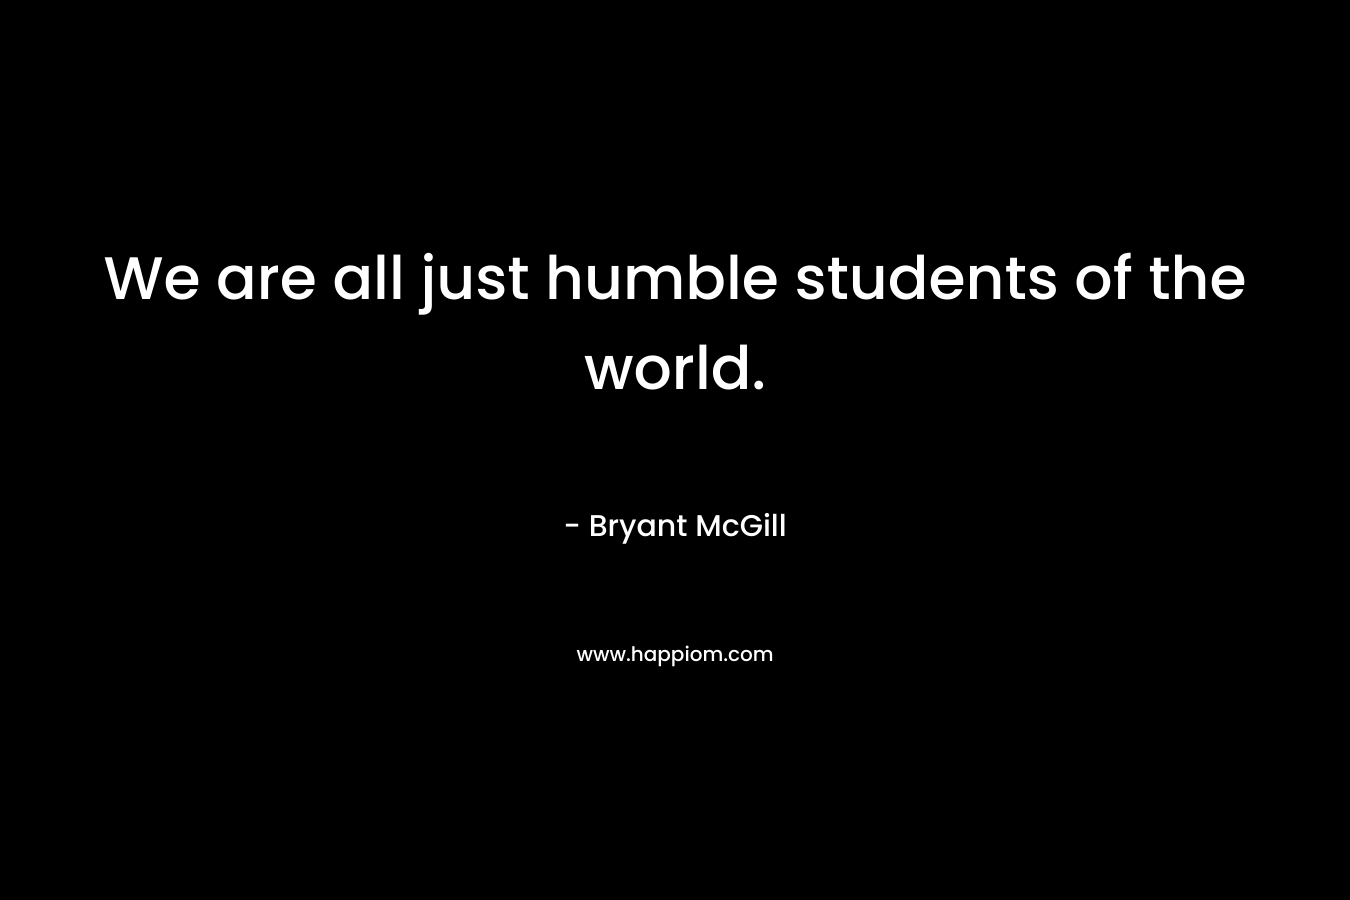 We are all just humble students of the world.